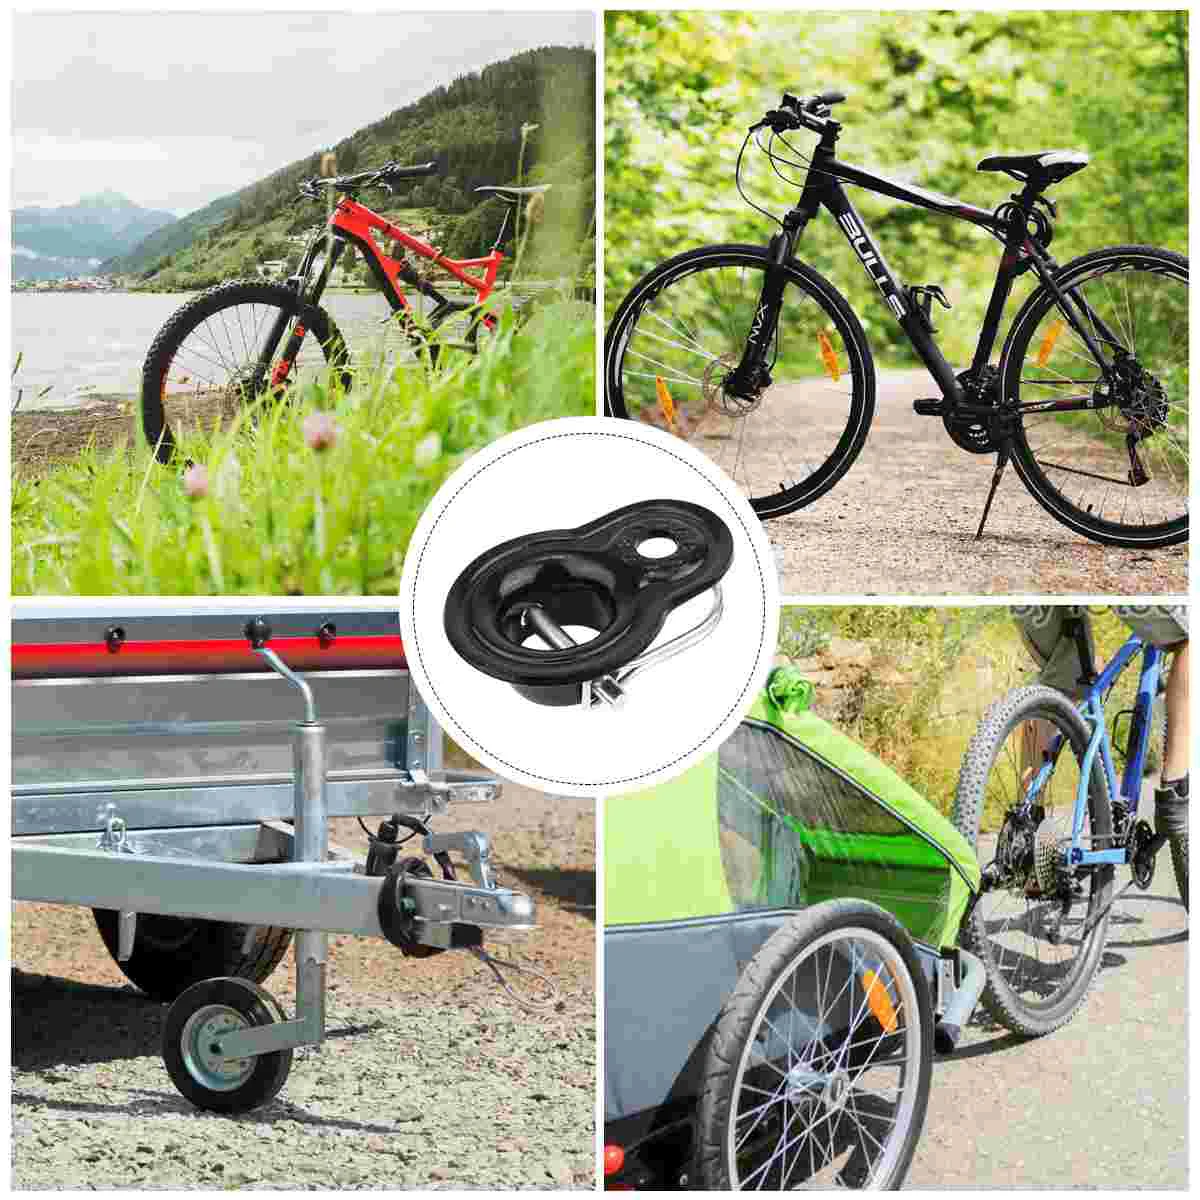 

Trailer Coupler Hitch Bike Cargo Attachments Attachment Adapter Baby Carriage Couplers Children Carrier Adapters Kids Cycling